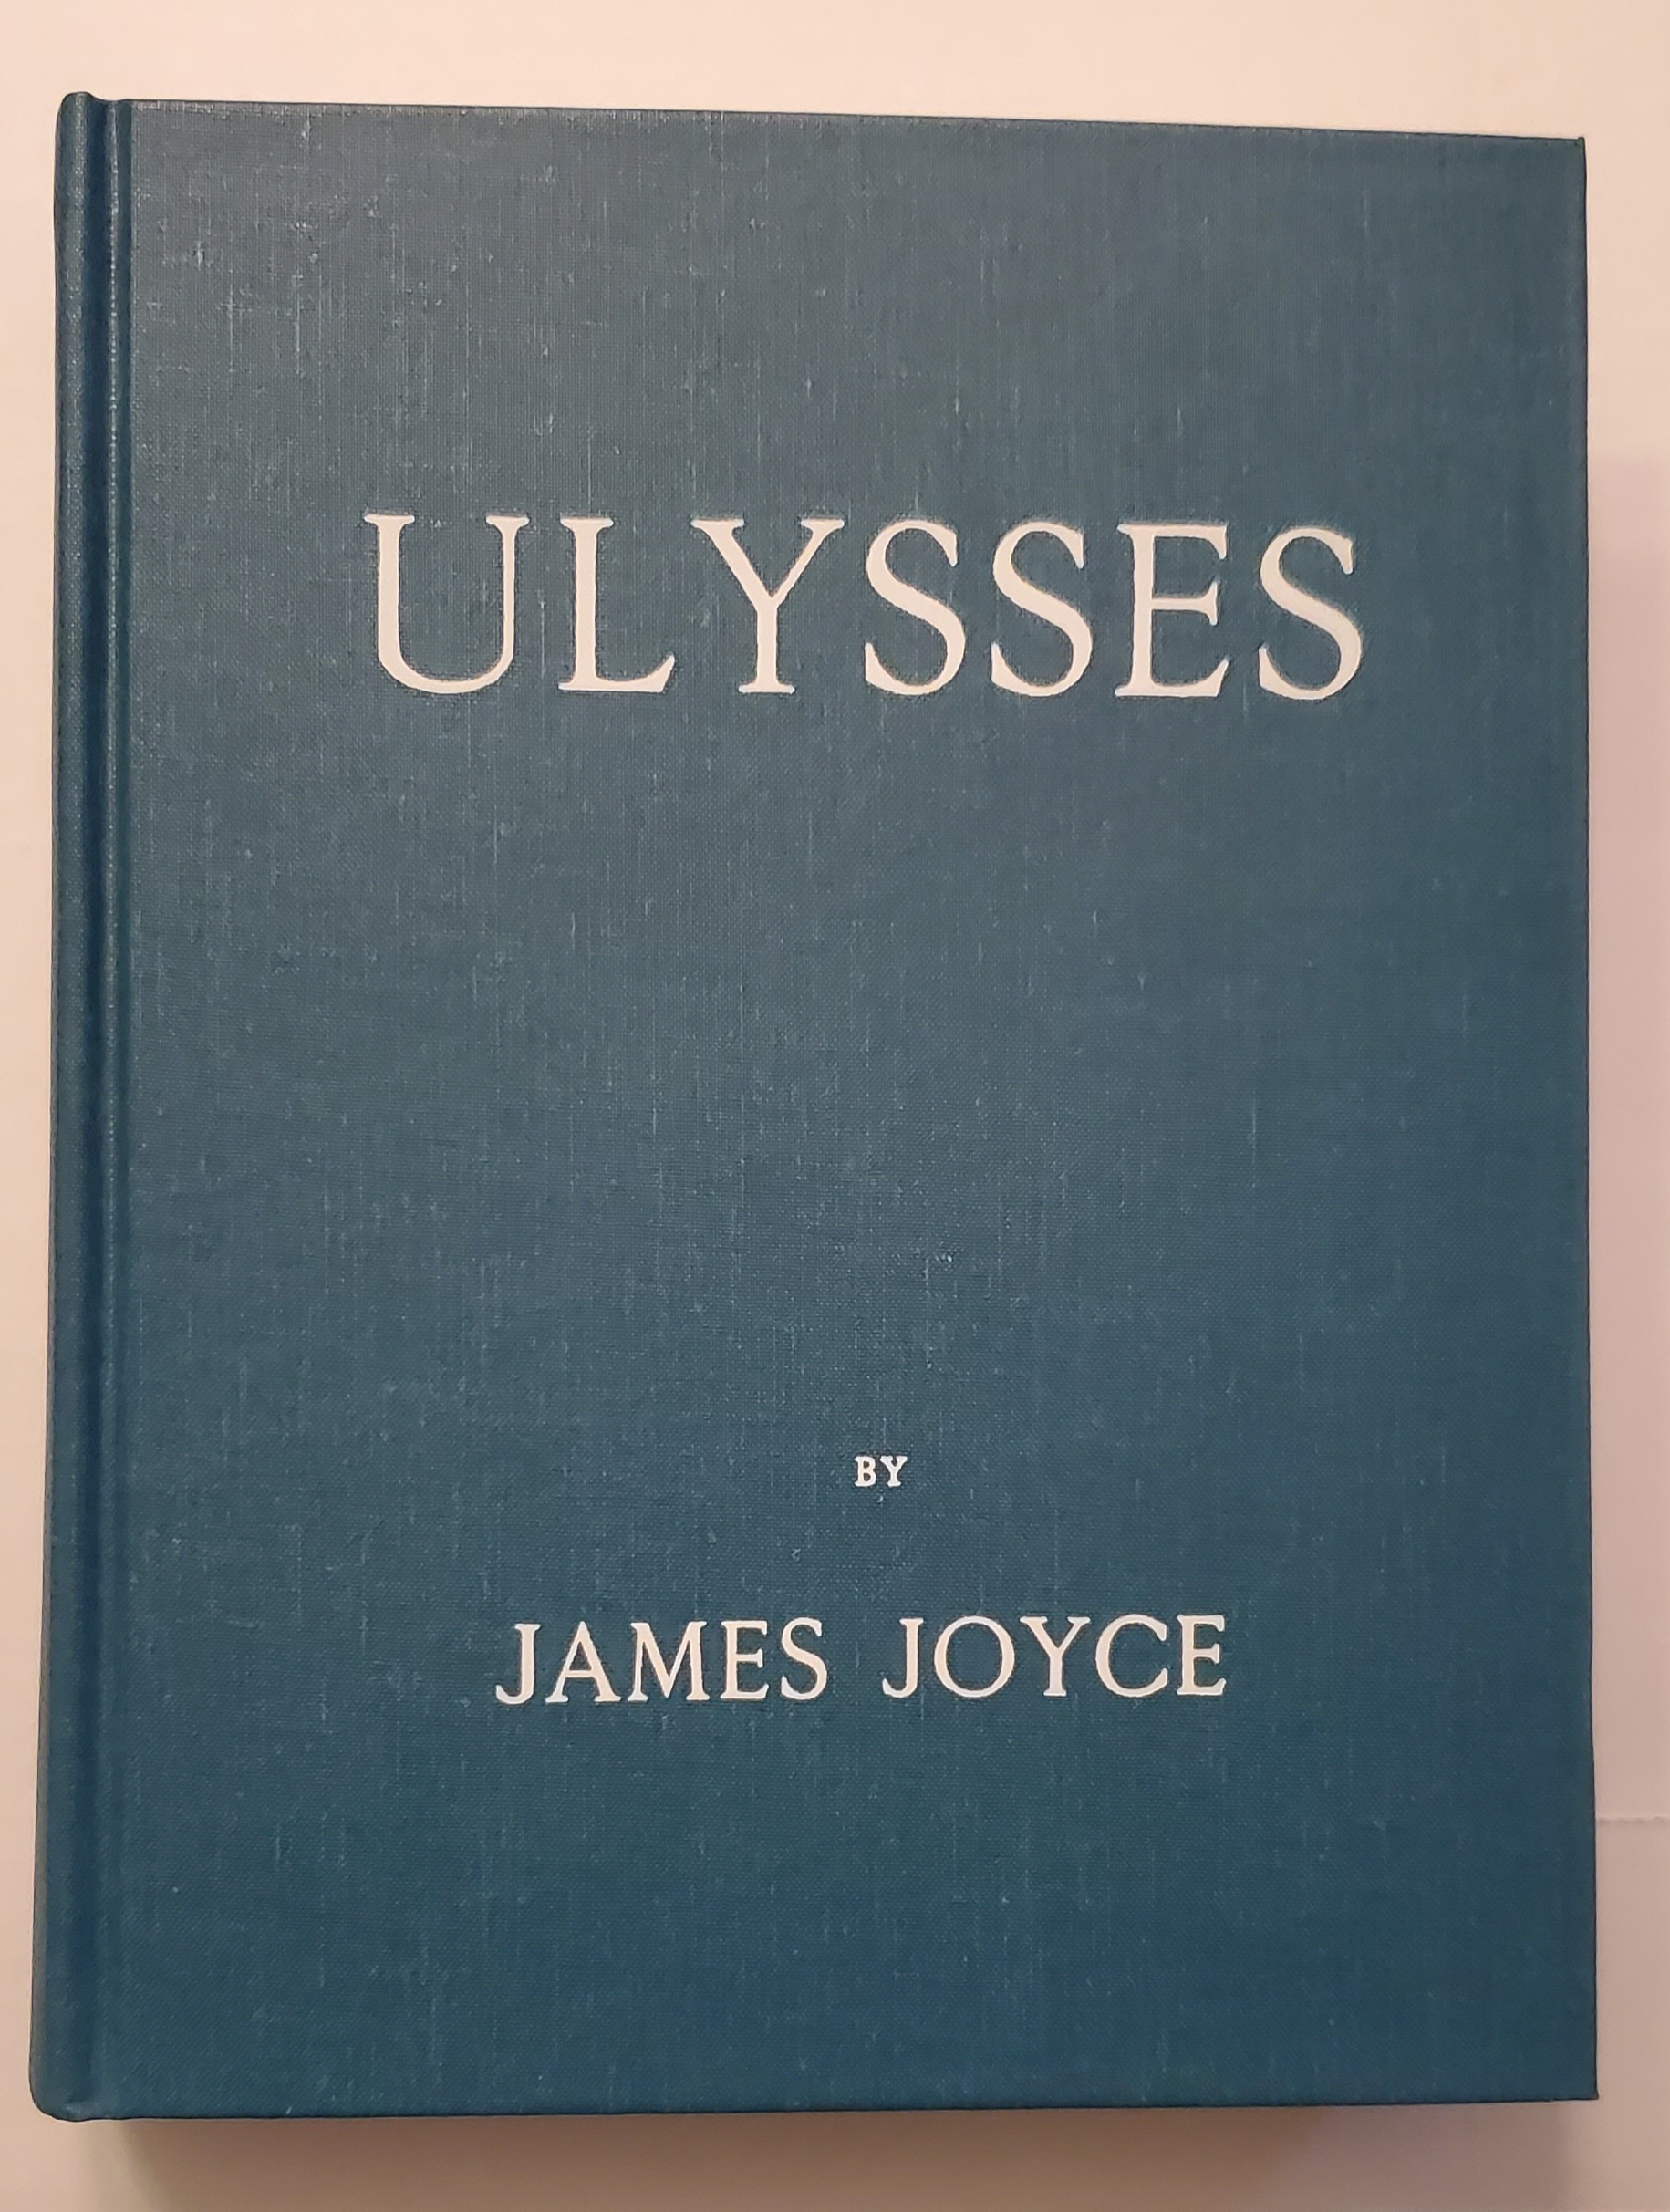 Ulysses: A Facsimile of the First Edition Published in Paris in 1922 [THIS COPY BOUND UPSIDE DOWN AND IN VARIANT BINDING COLOR] - Joyce, James